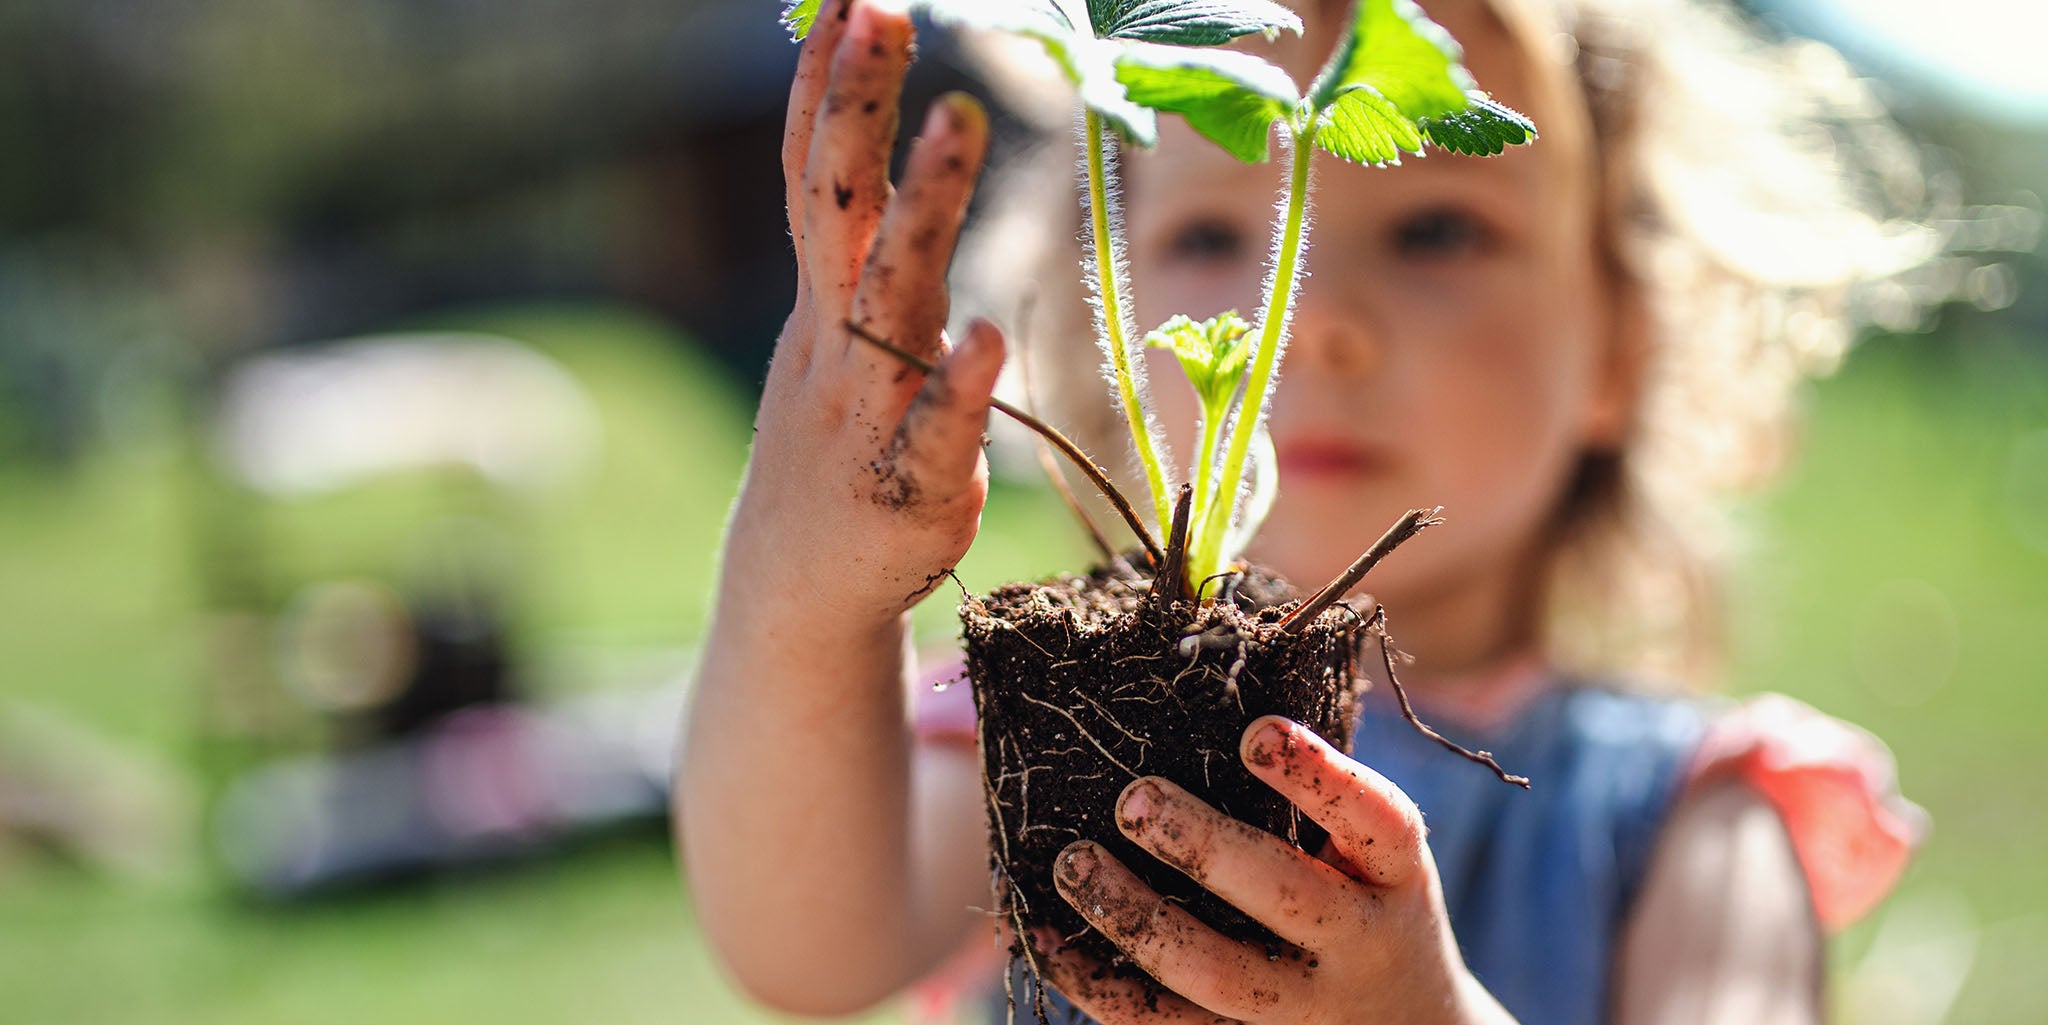 Child holding a plant with dirt on her hands.